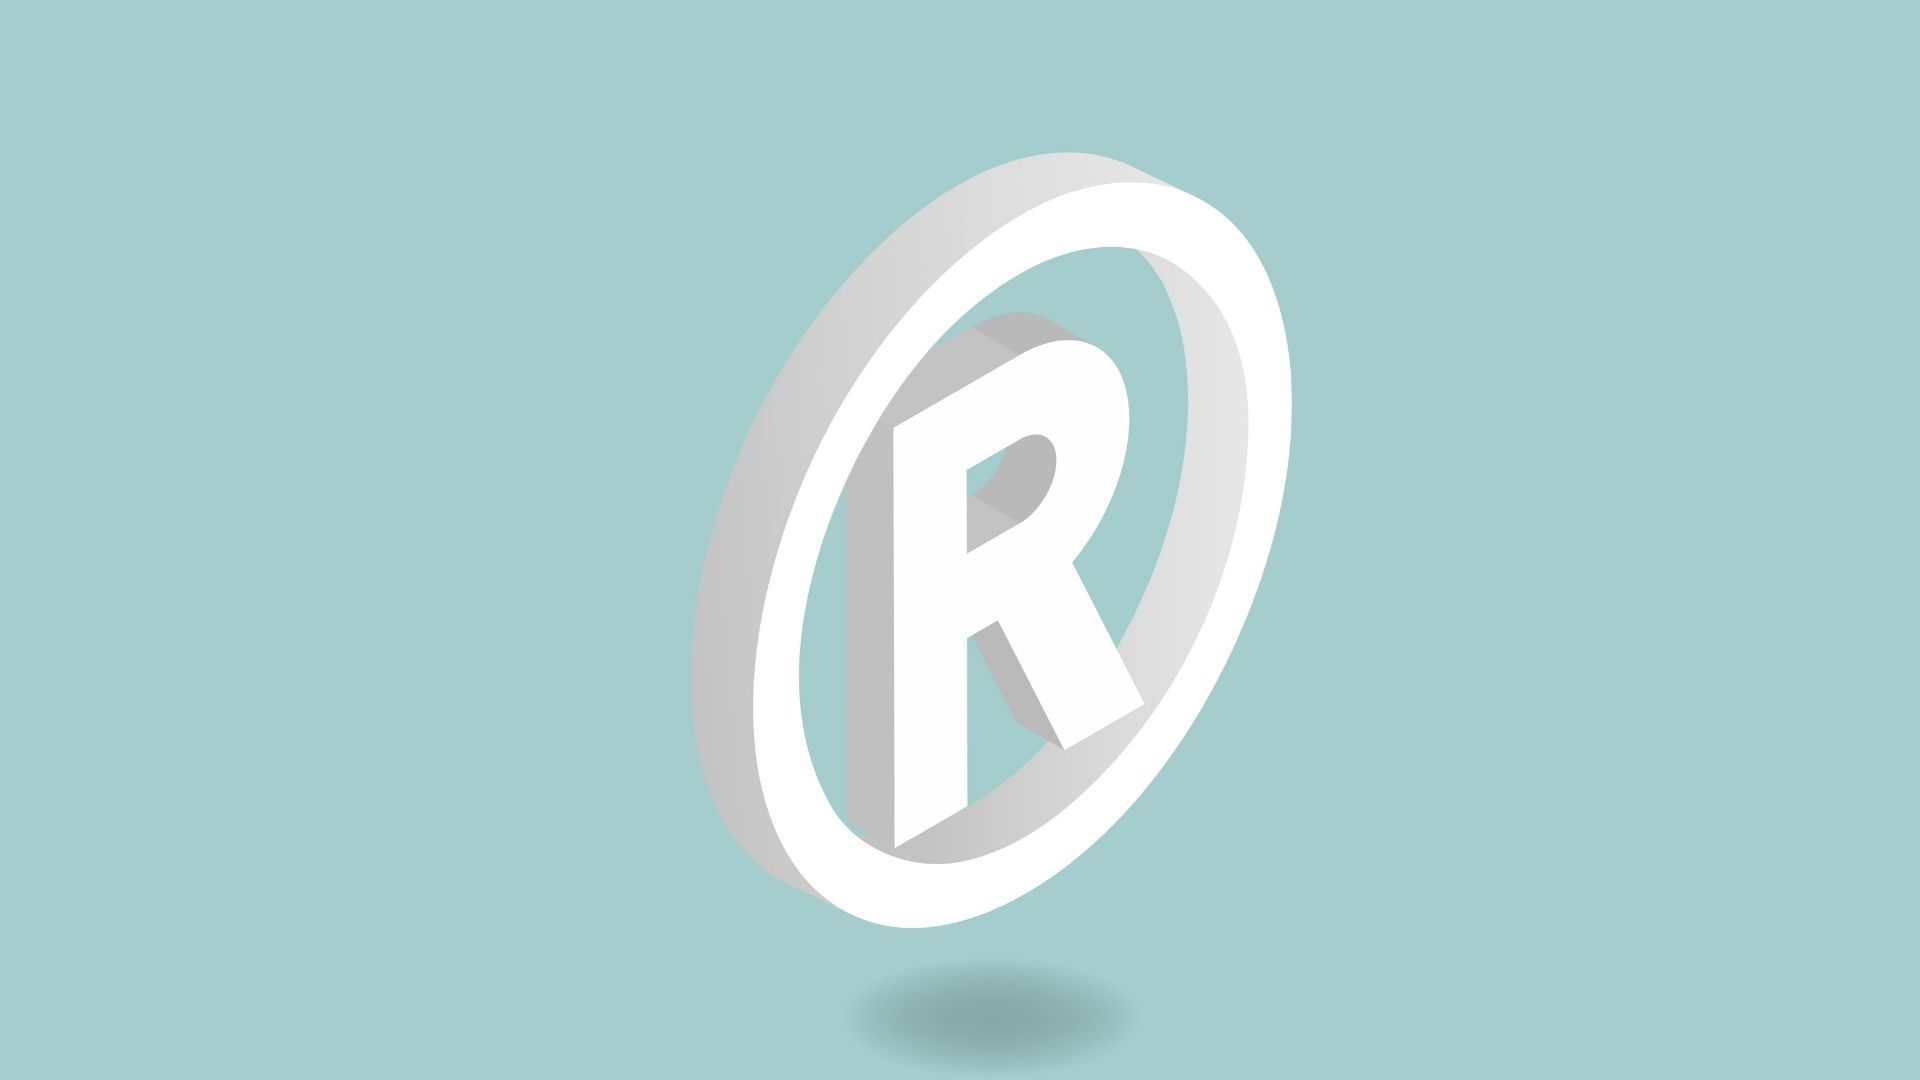 Registered Trademark Symbol  Meaning, Usage and how to write